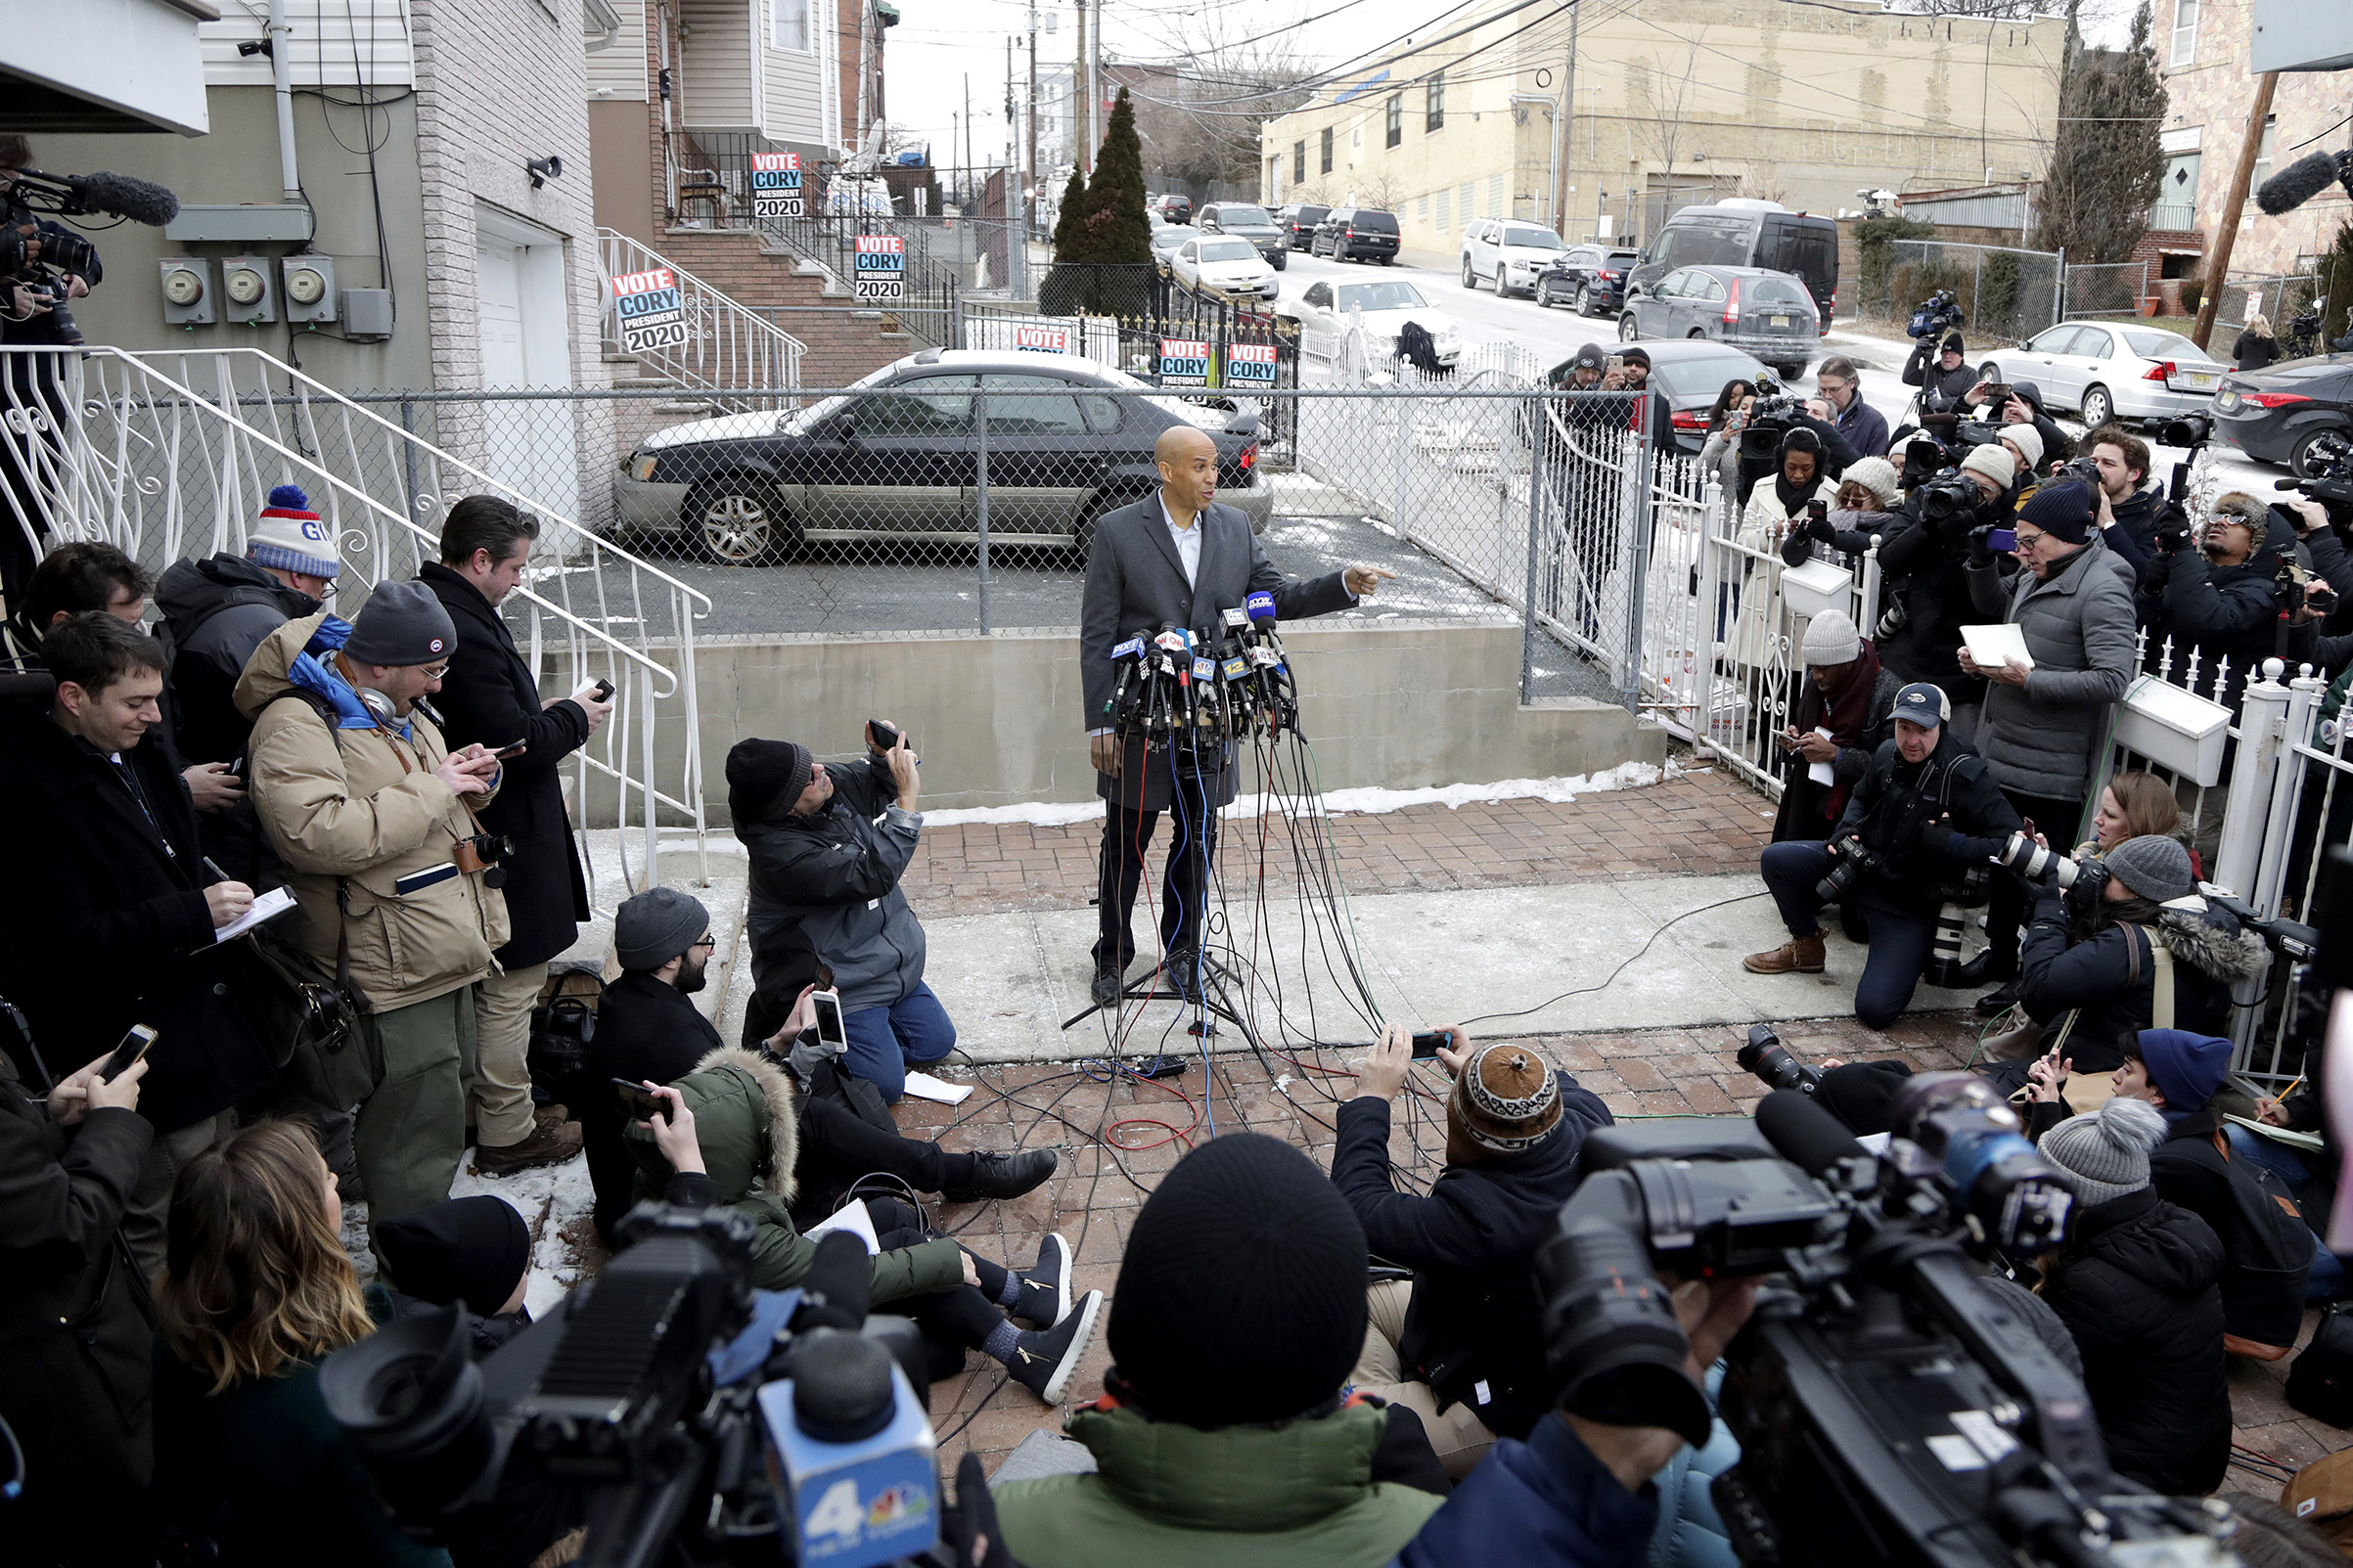 Sen. Cory Booker speaks during a news conference outside of his home in Newark, N.J. on Feb. 1, 2019. (Julio Cortez—AP)